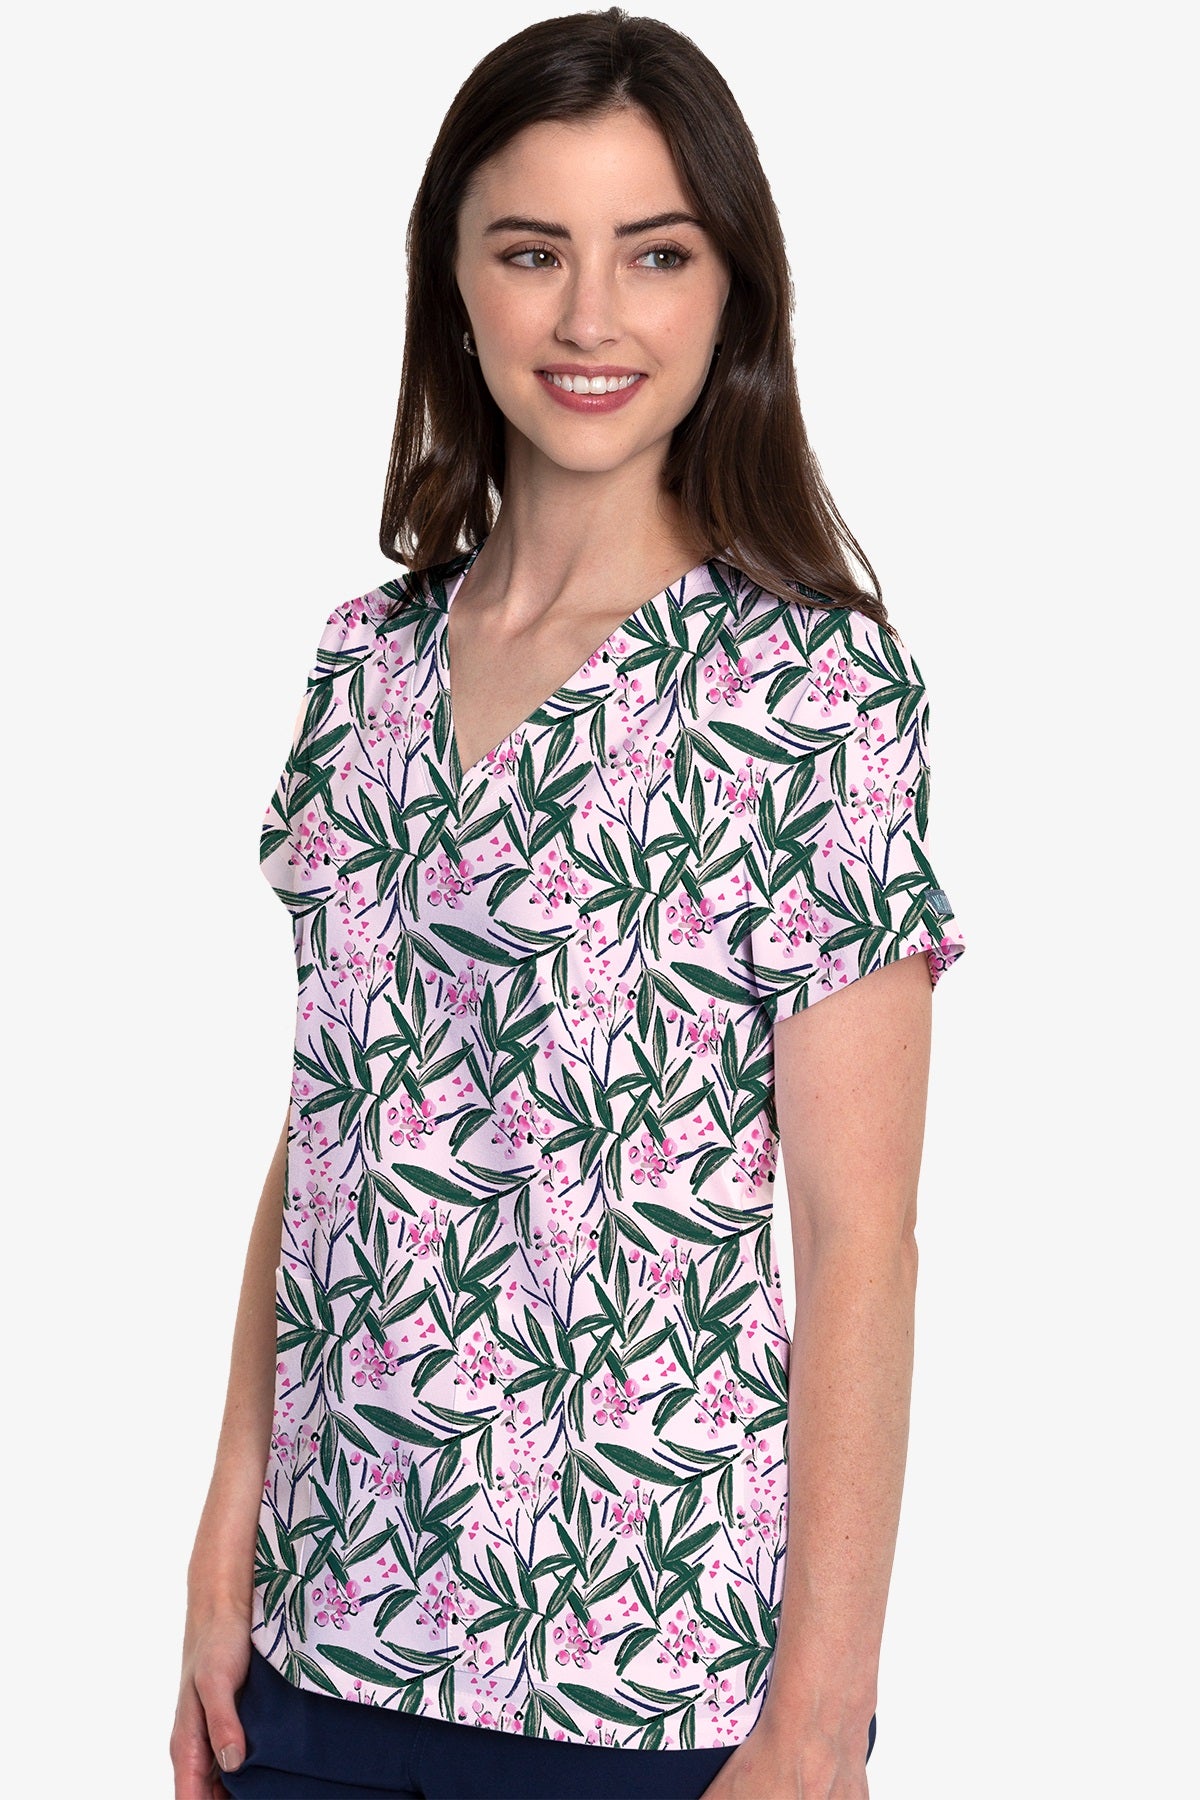 Med Couture Vicky Print Tops Palm